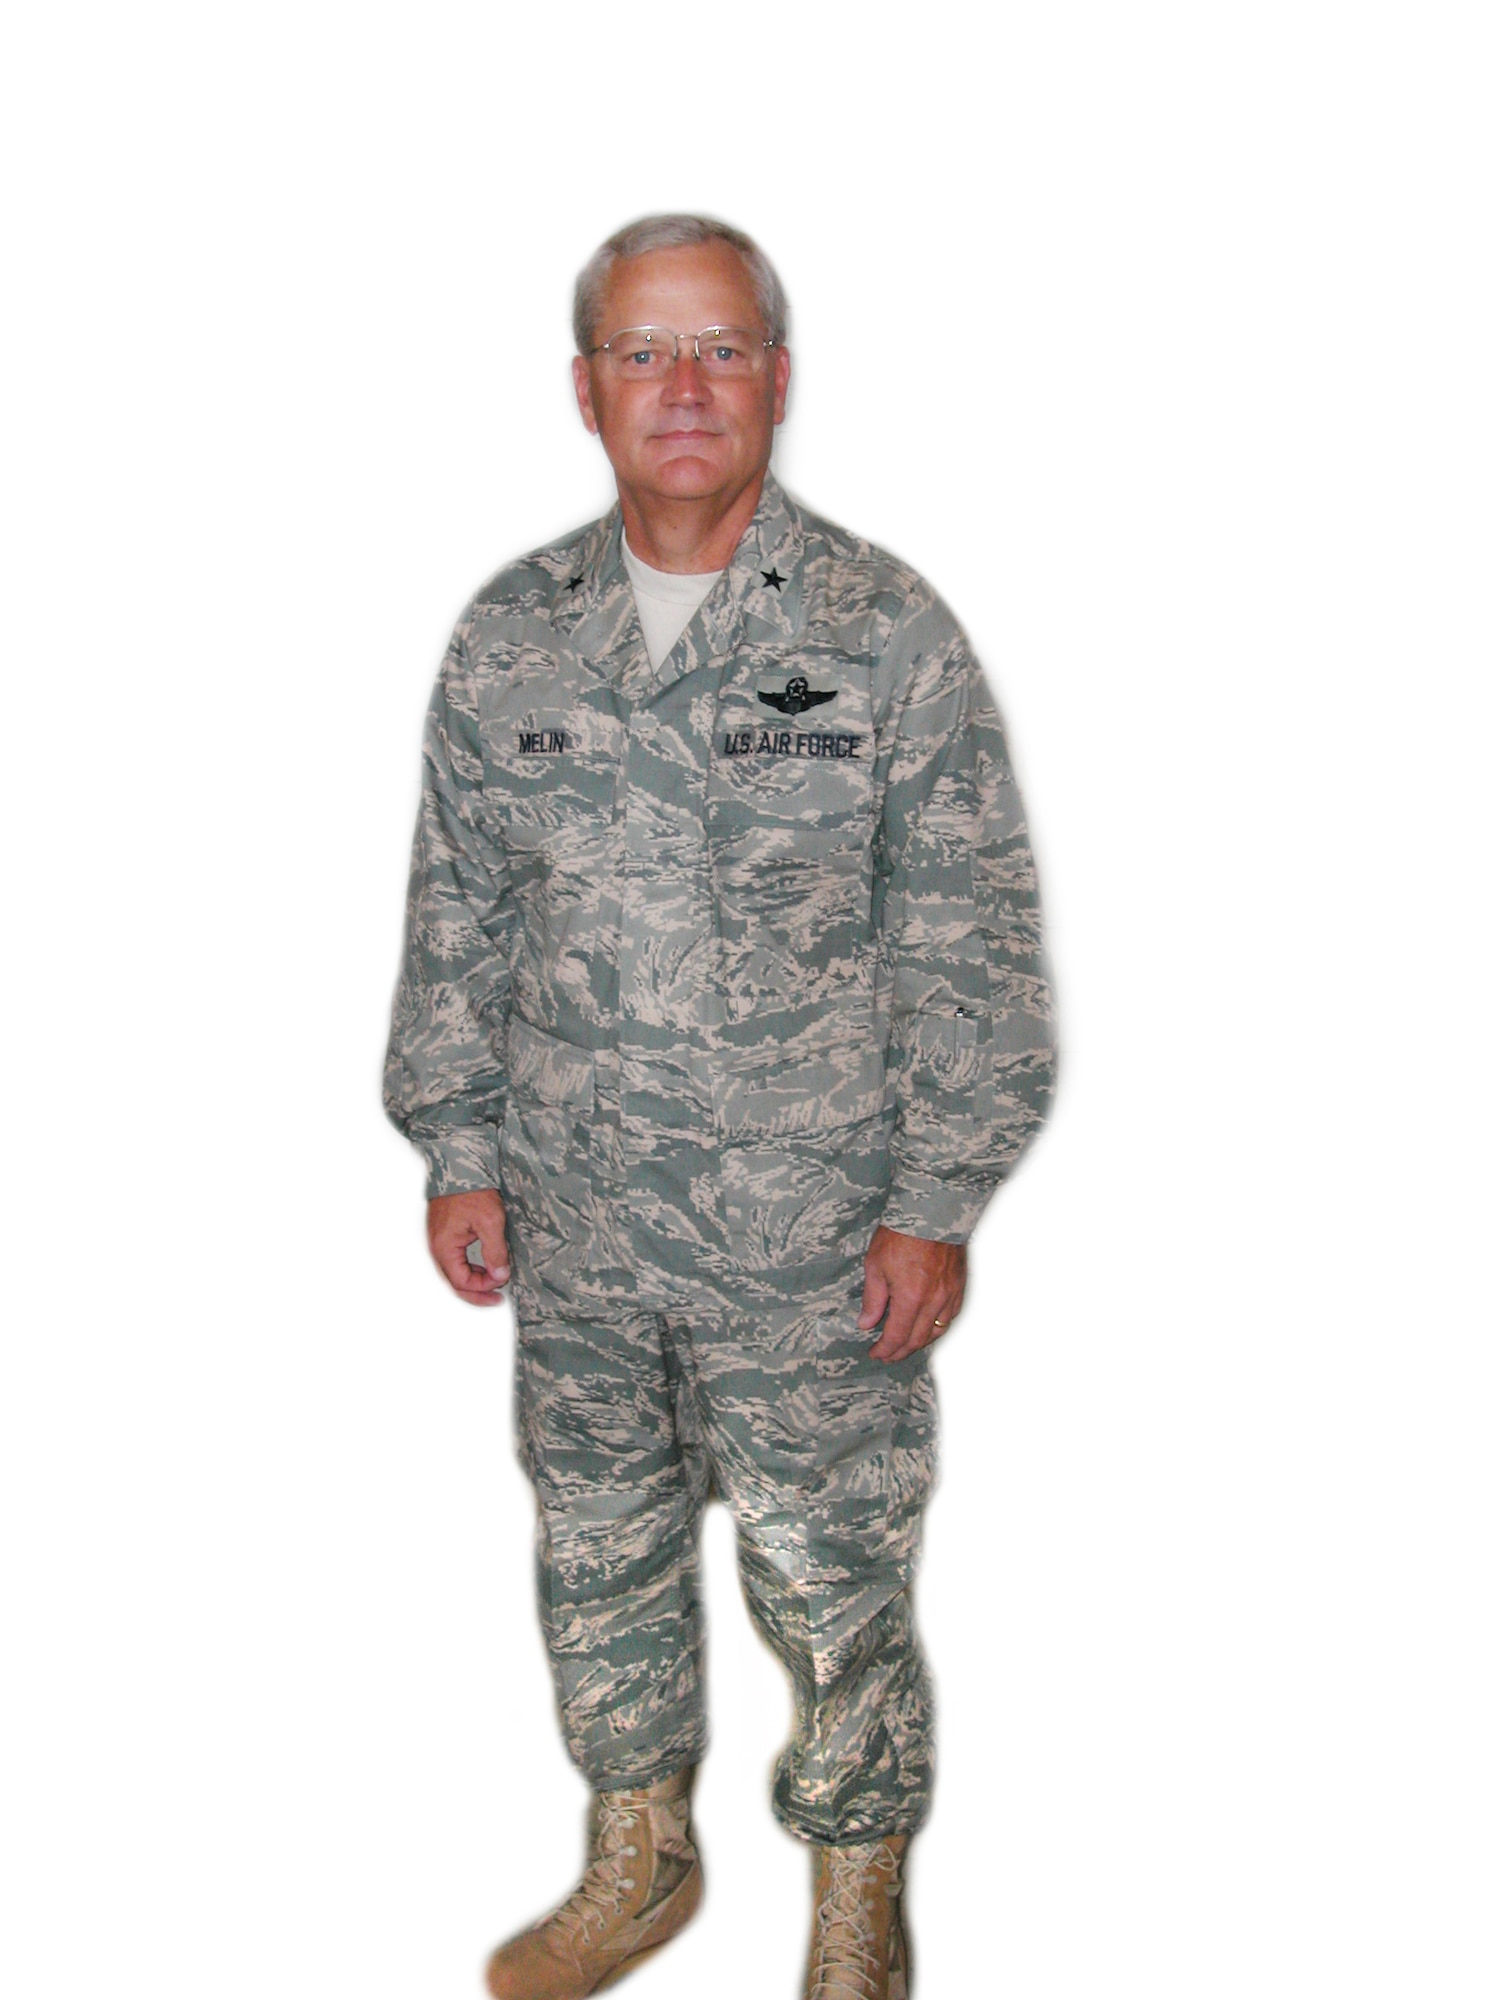 Brig. Gen. James Melin, the 452nd Air Mobility Wing commander at March Air Reserve Base, shows his new Airman Battle Uniform to troops during the A Unit Training Assembly Aug. 12. According to the general, troops at March should expect to get their uniforms issued around spring time of 2008. He also noted that though uniforms will be available for purchase starting in October, enlisted members who choose to purchase them before the actual issue will not be reinbursed.            